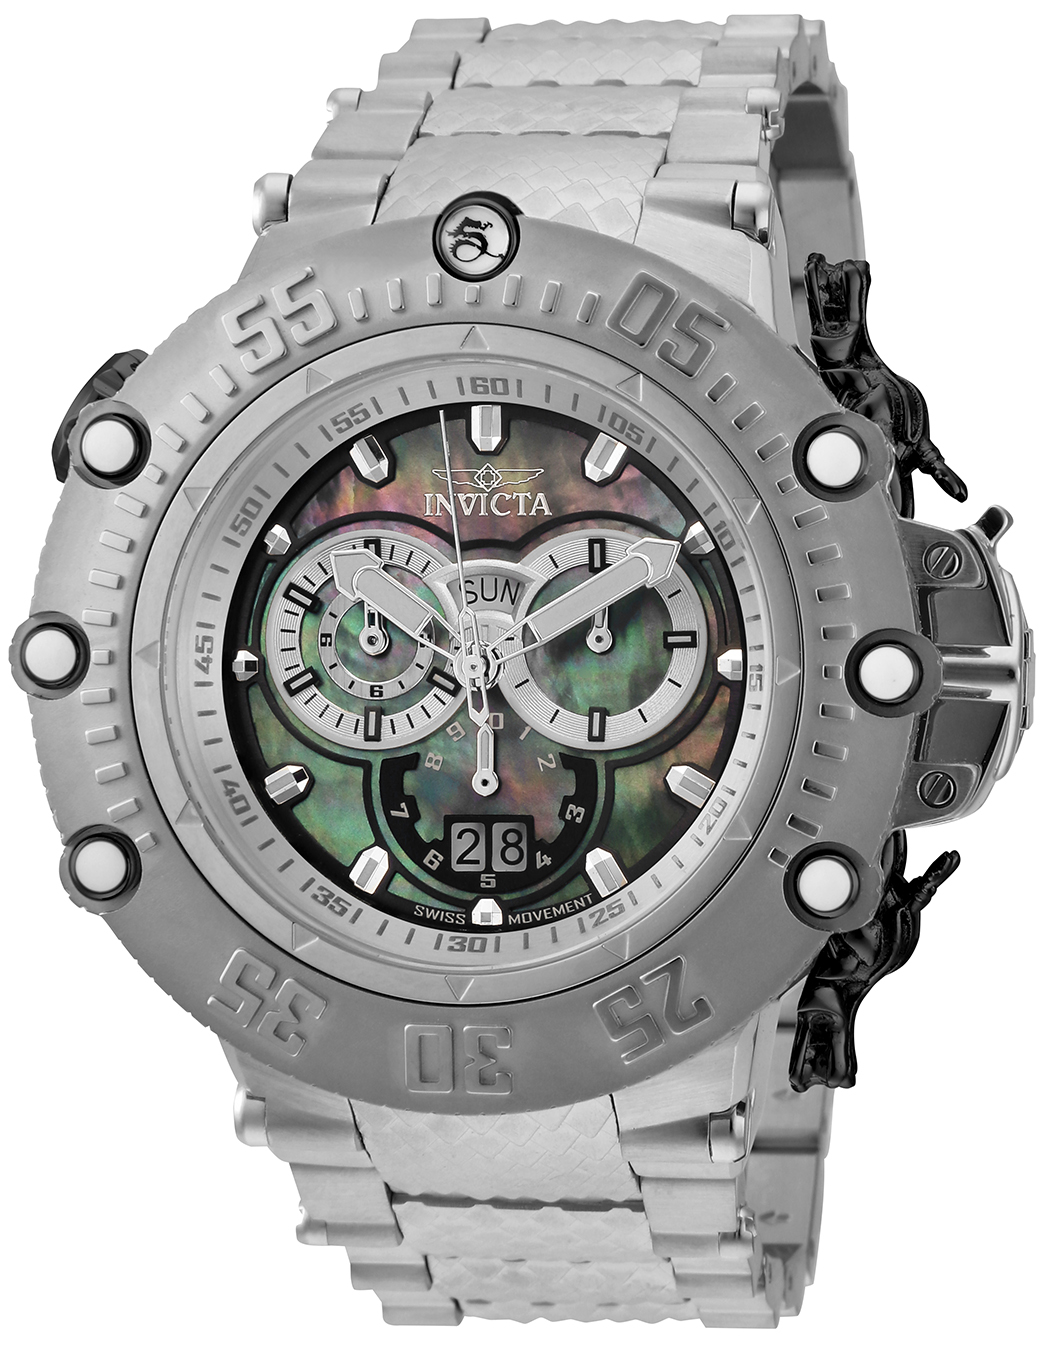 Invicta Subaqua SHUTTER Men's Watch w/ Metal, Mother of Pearl & Oyster Dial - 52mm, Steel (32949)